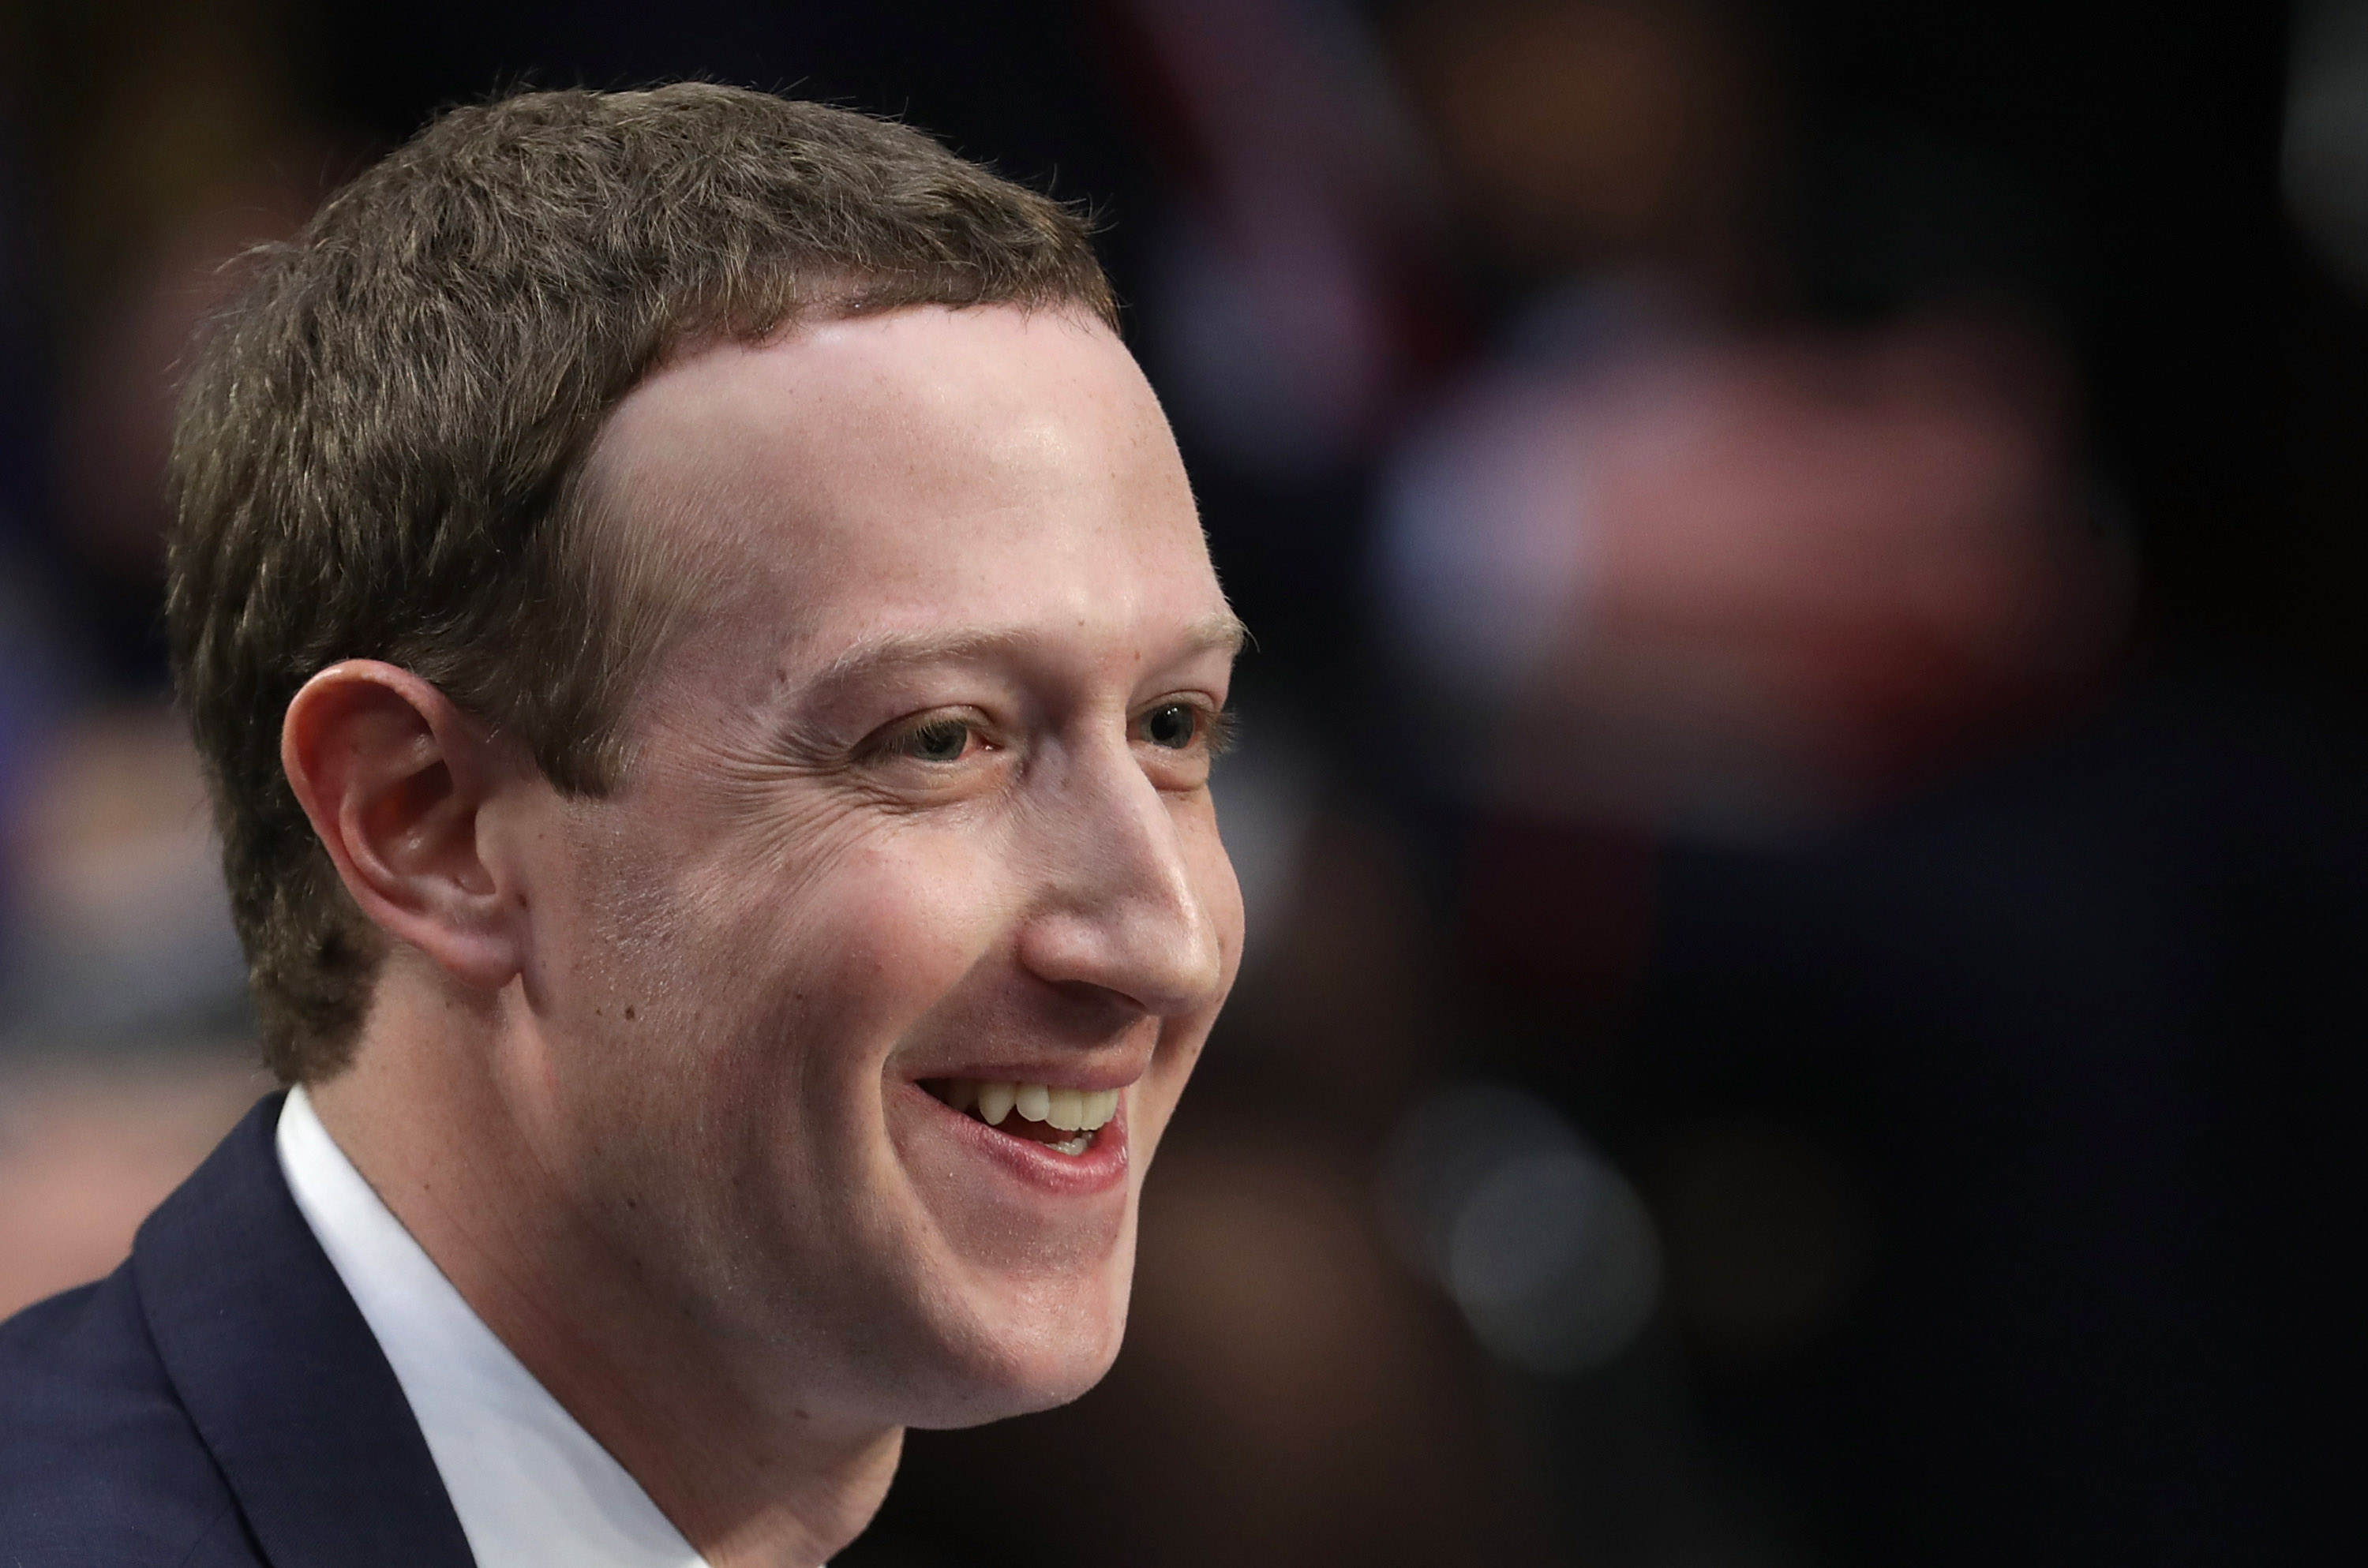 Mark Zuckerberg Just Passed This Iconic Billionaire to Become the 3rd-Richest Man in the World